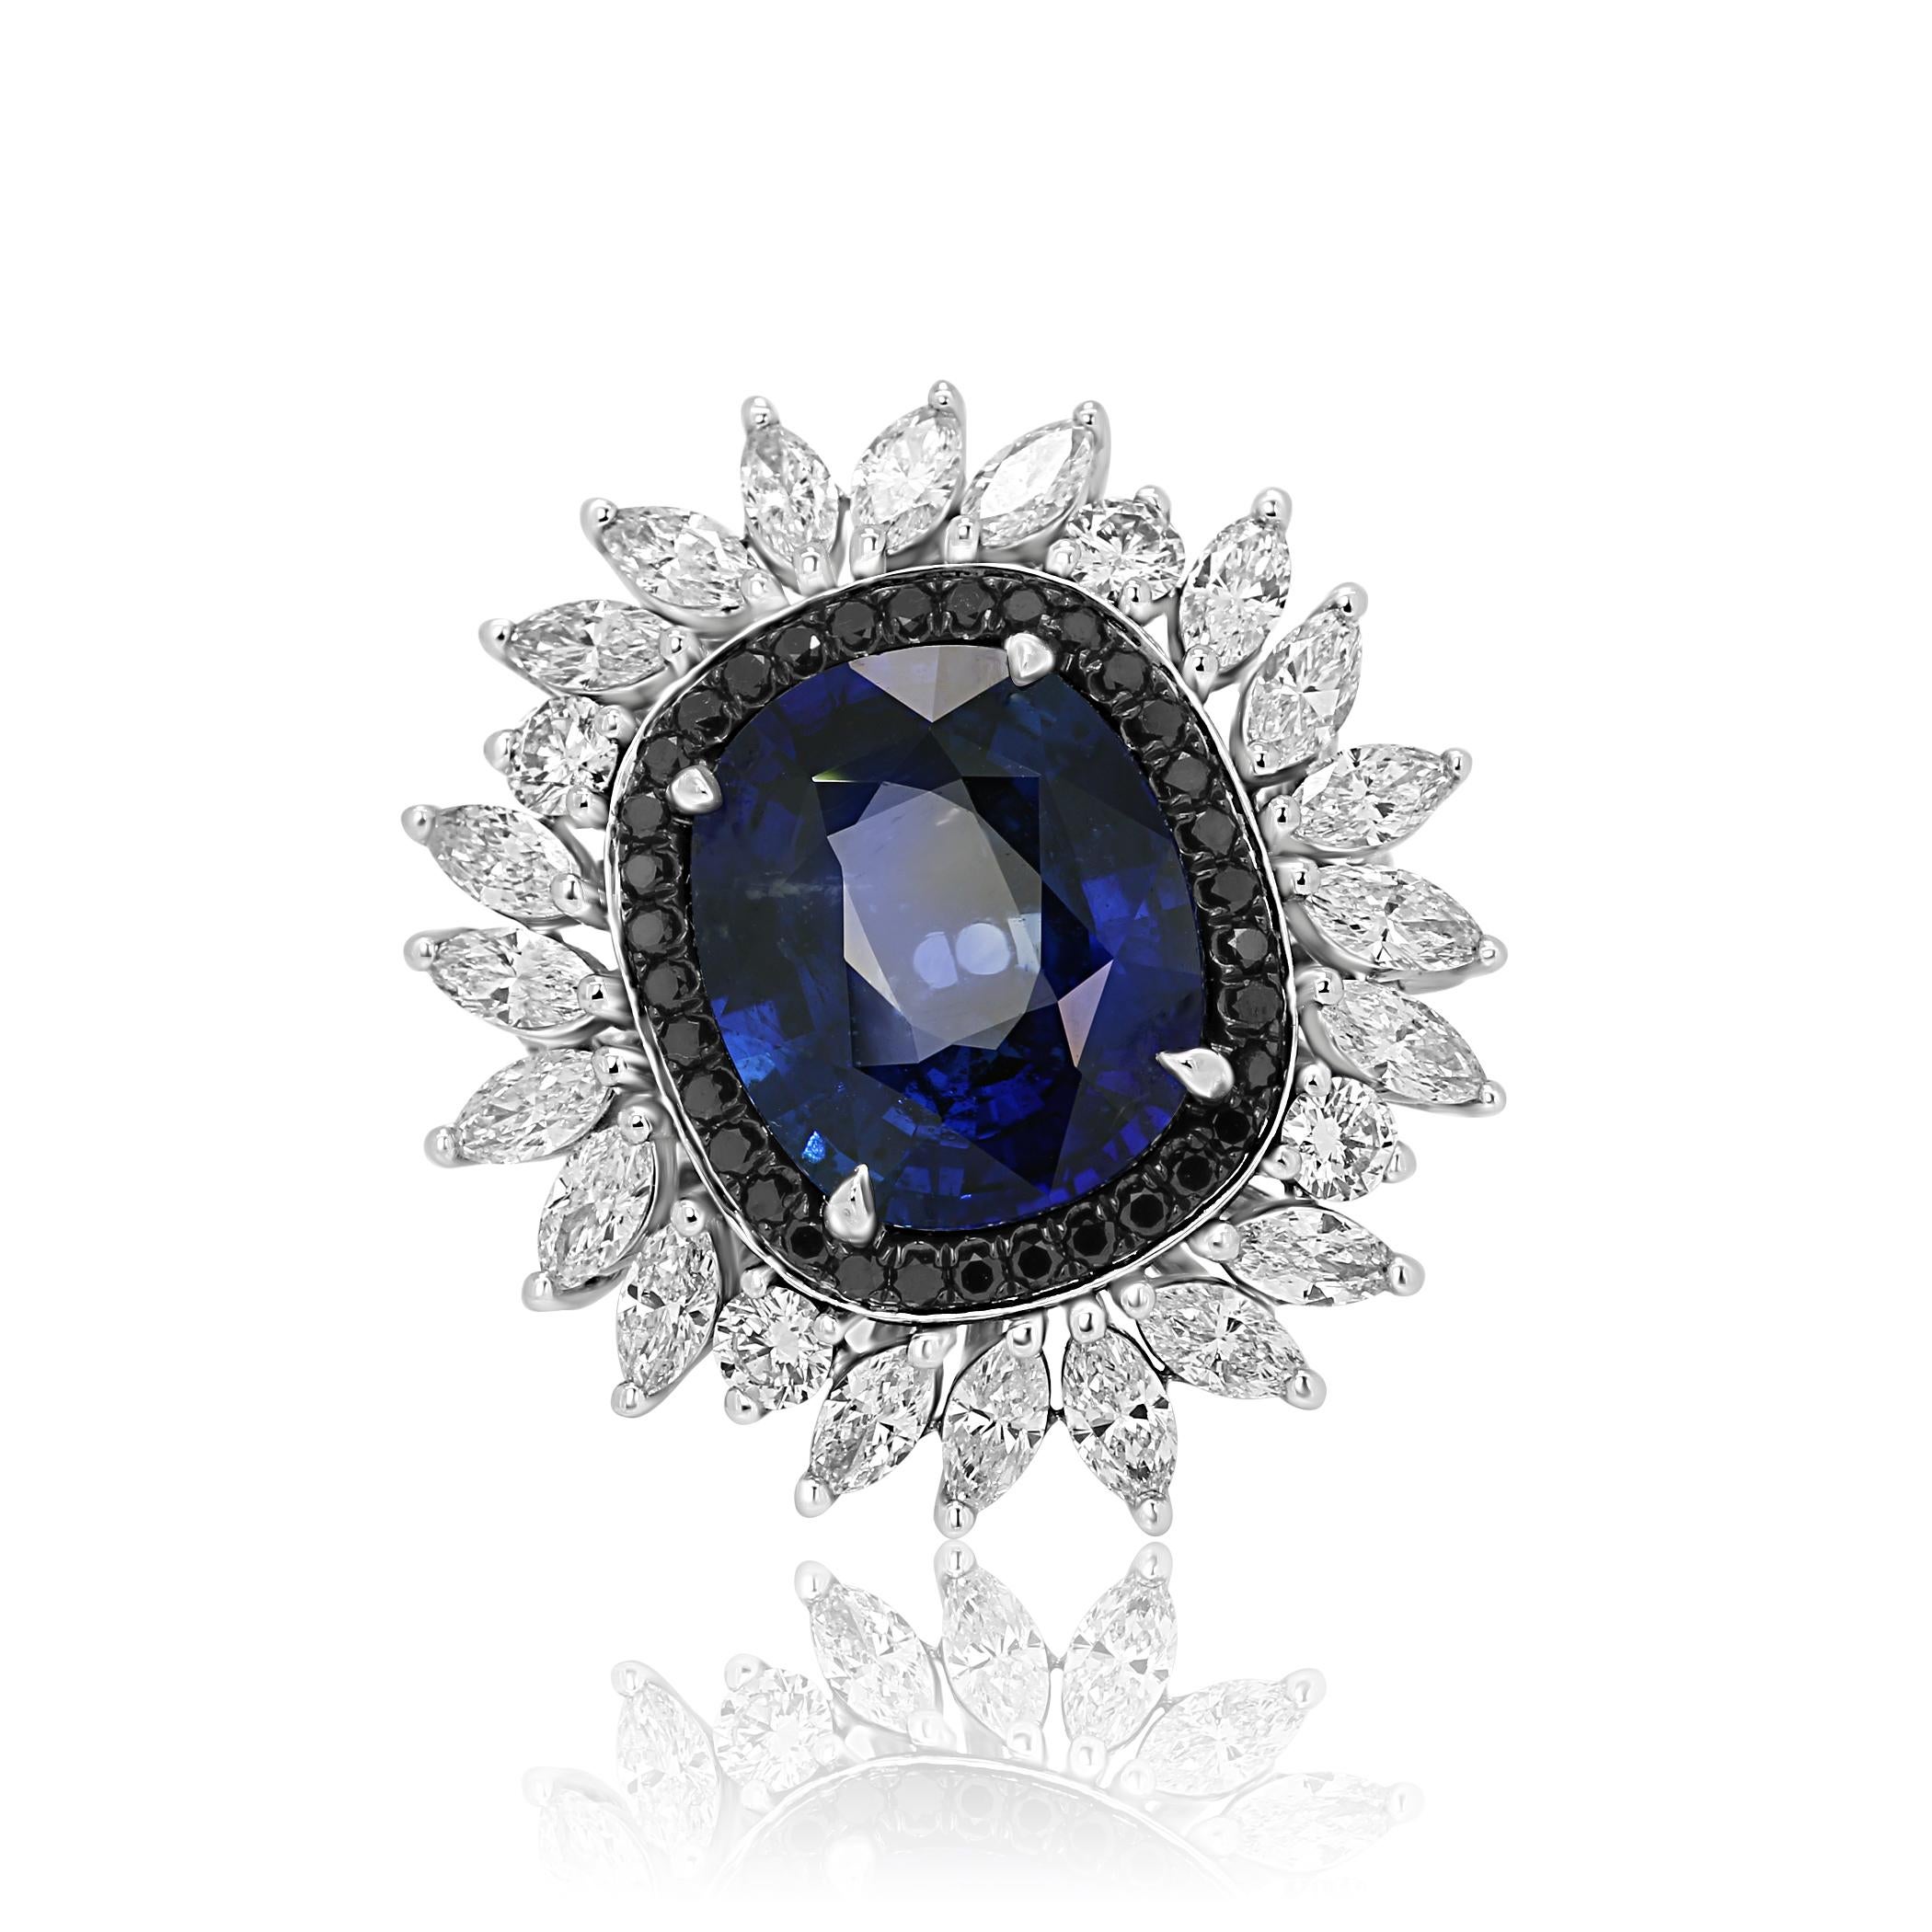 GIA Certified Natural Blue Sapphire Cushion 6.83 Carat Heated Only encircled in a Double Halo of Black Diamonds 0.30 Carat and 20 Colorless VS-SI Diamond Marquise 1.62 Carat and Colorless VS-SI diamond Rounds 0.71 Carat set in One of a Kind 18K